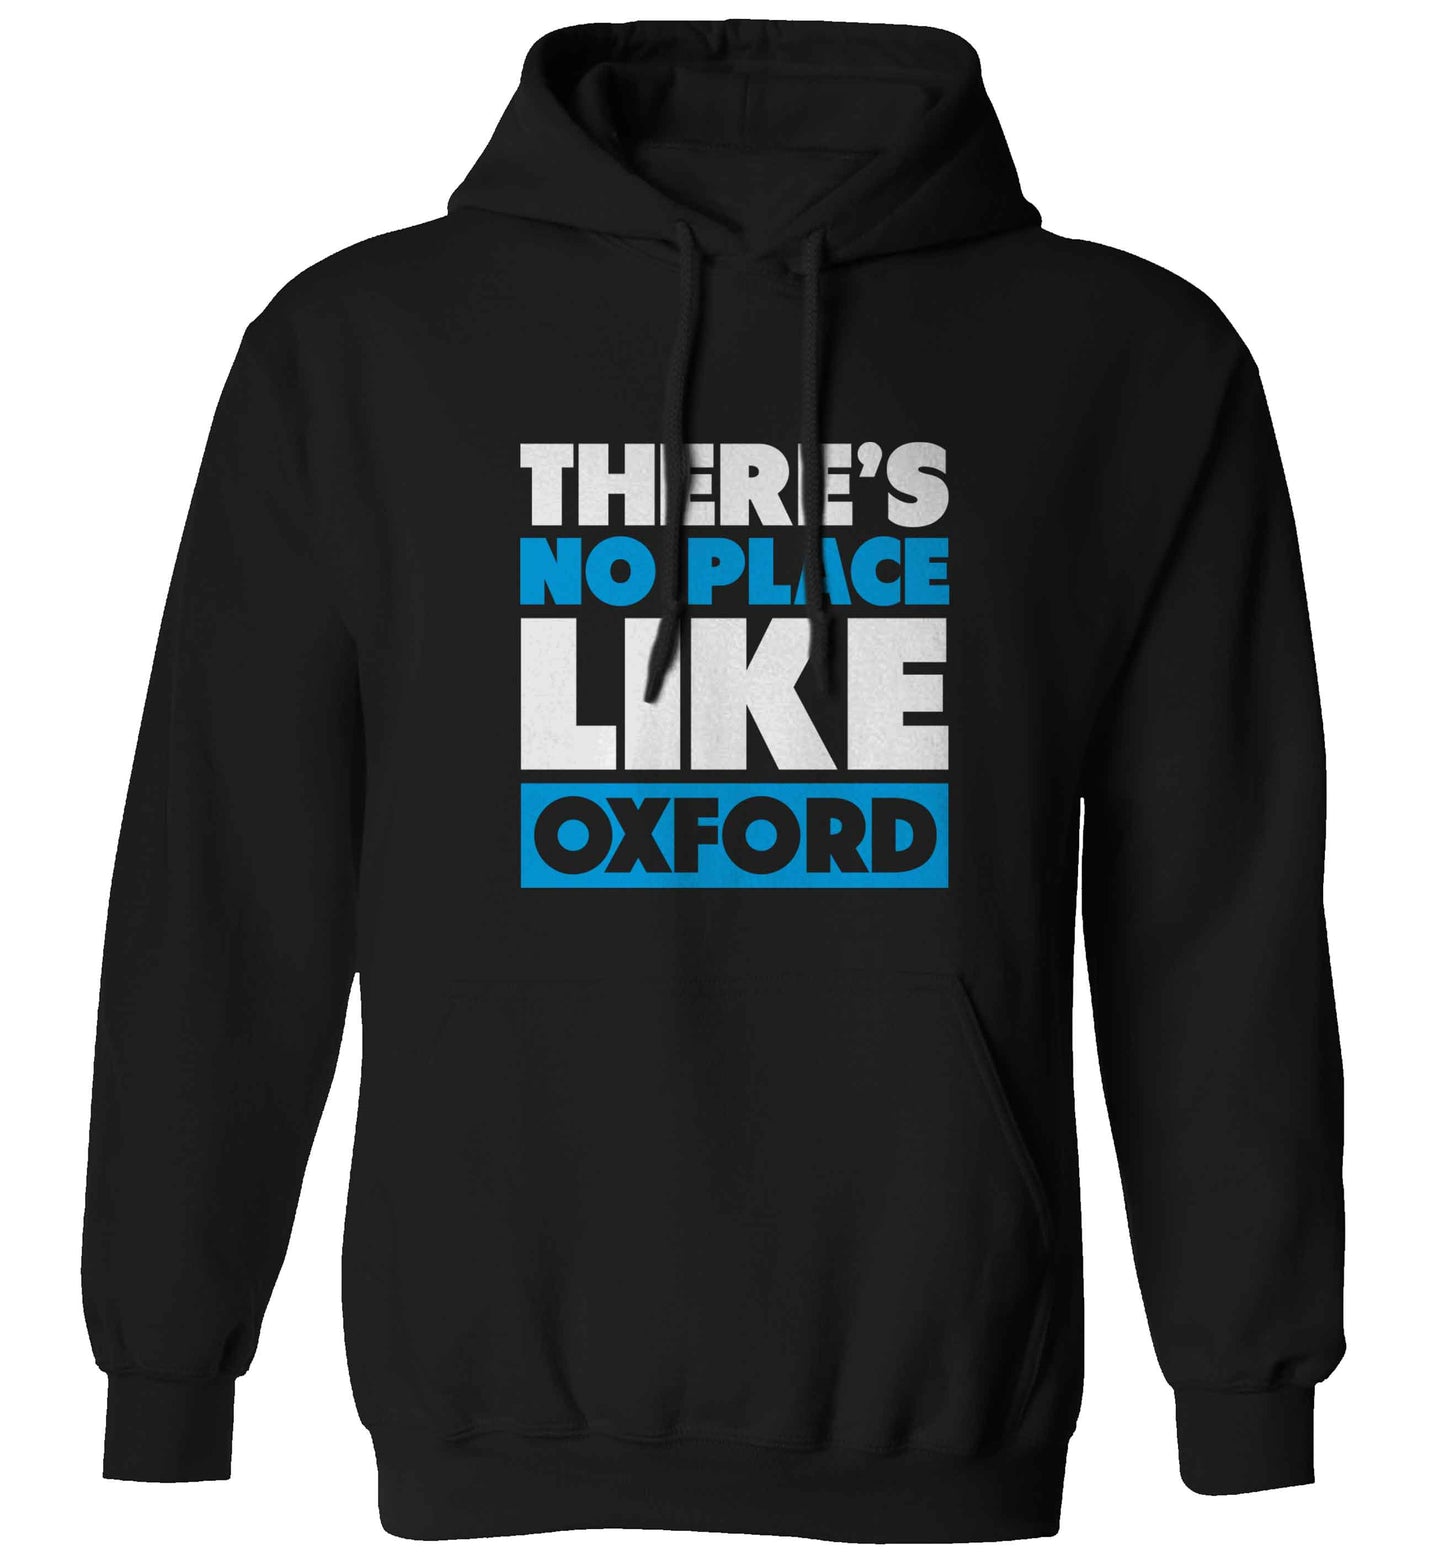 There's no place like Oxford adults unisex black hoodie 2XL